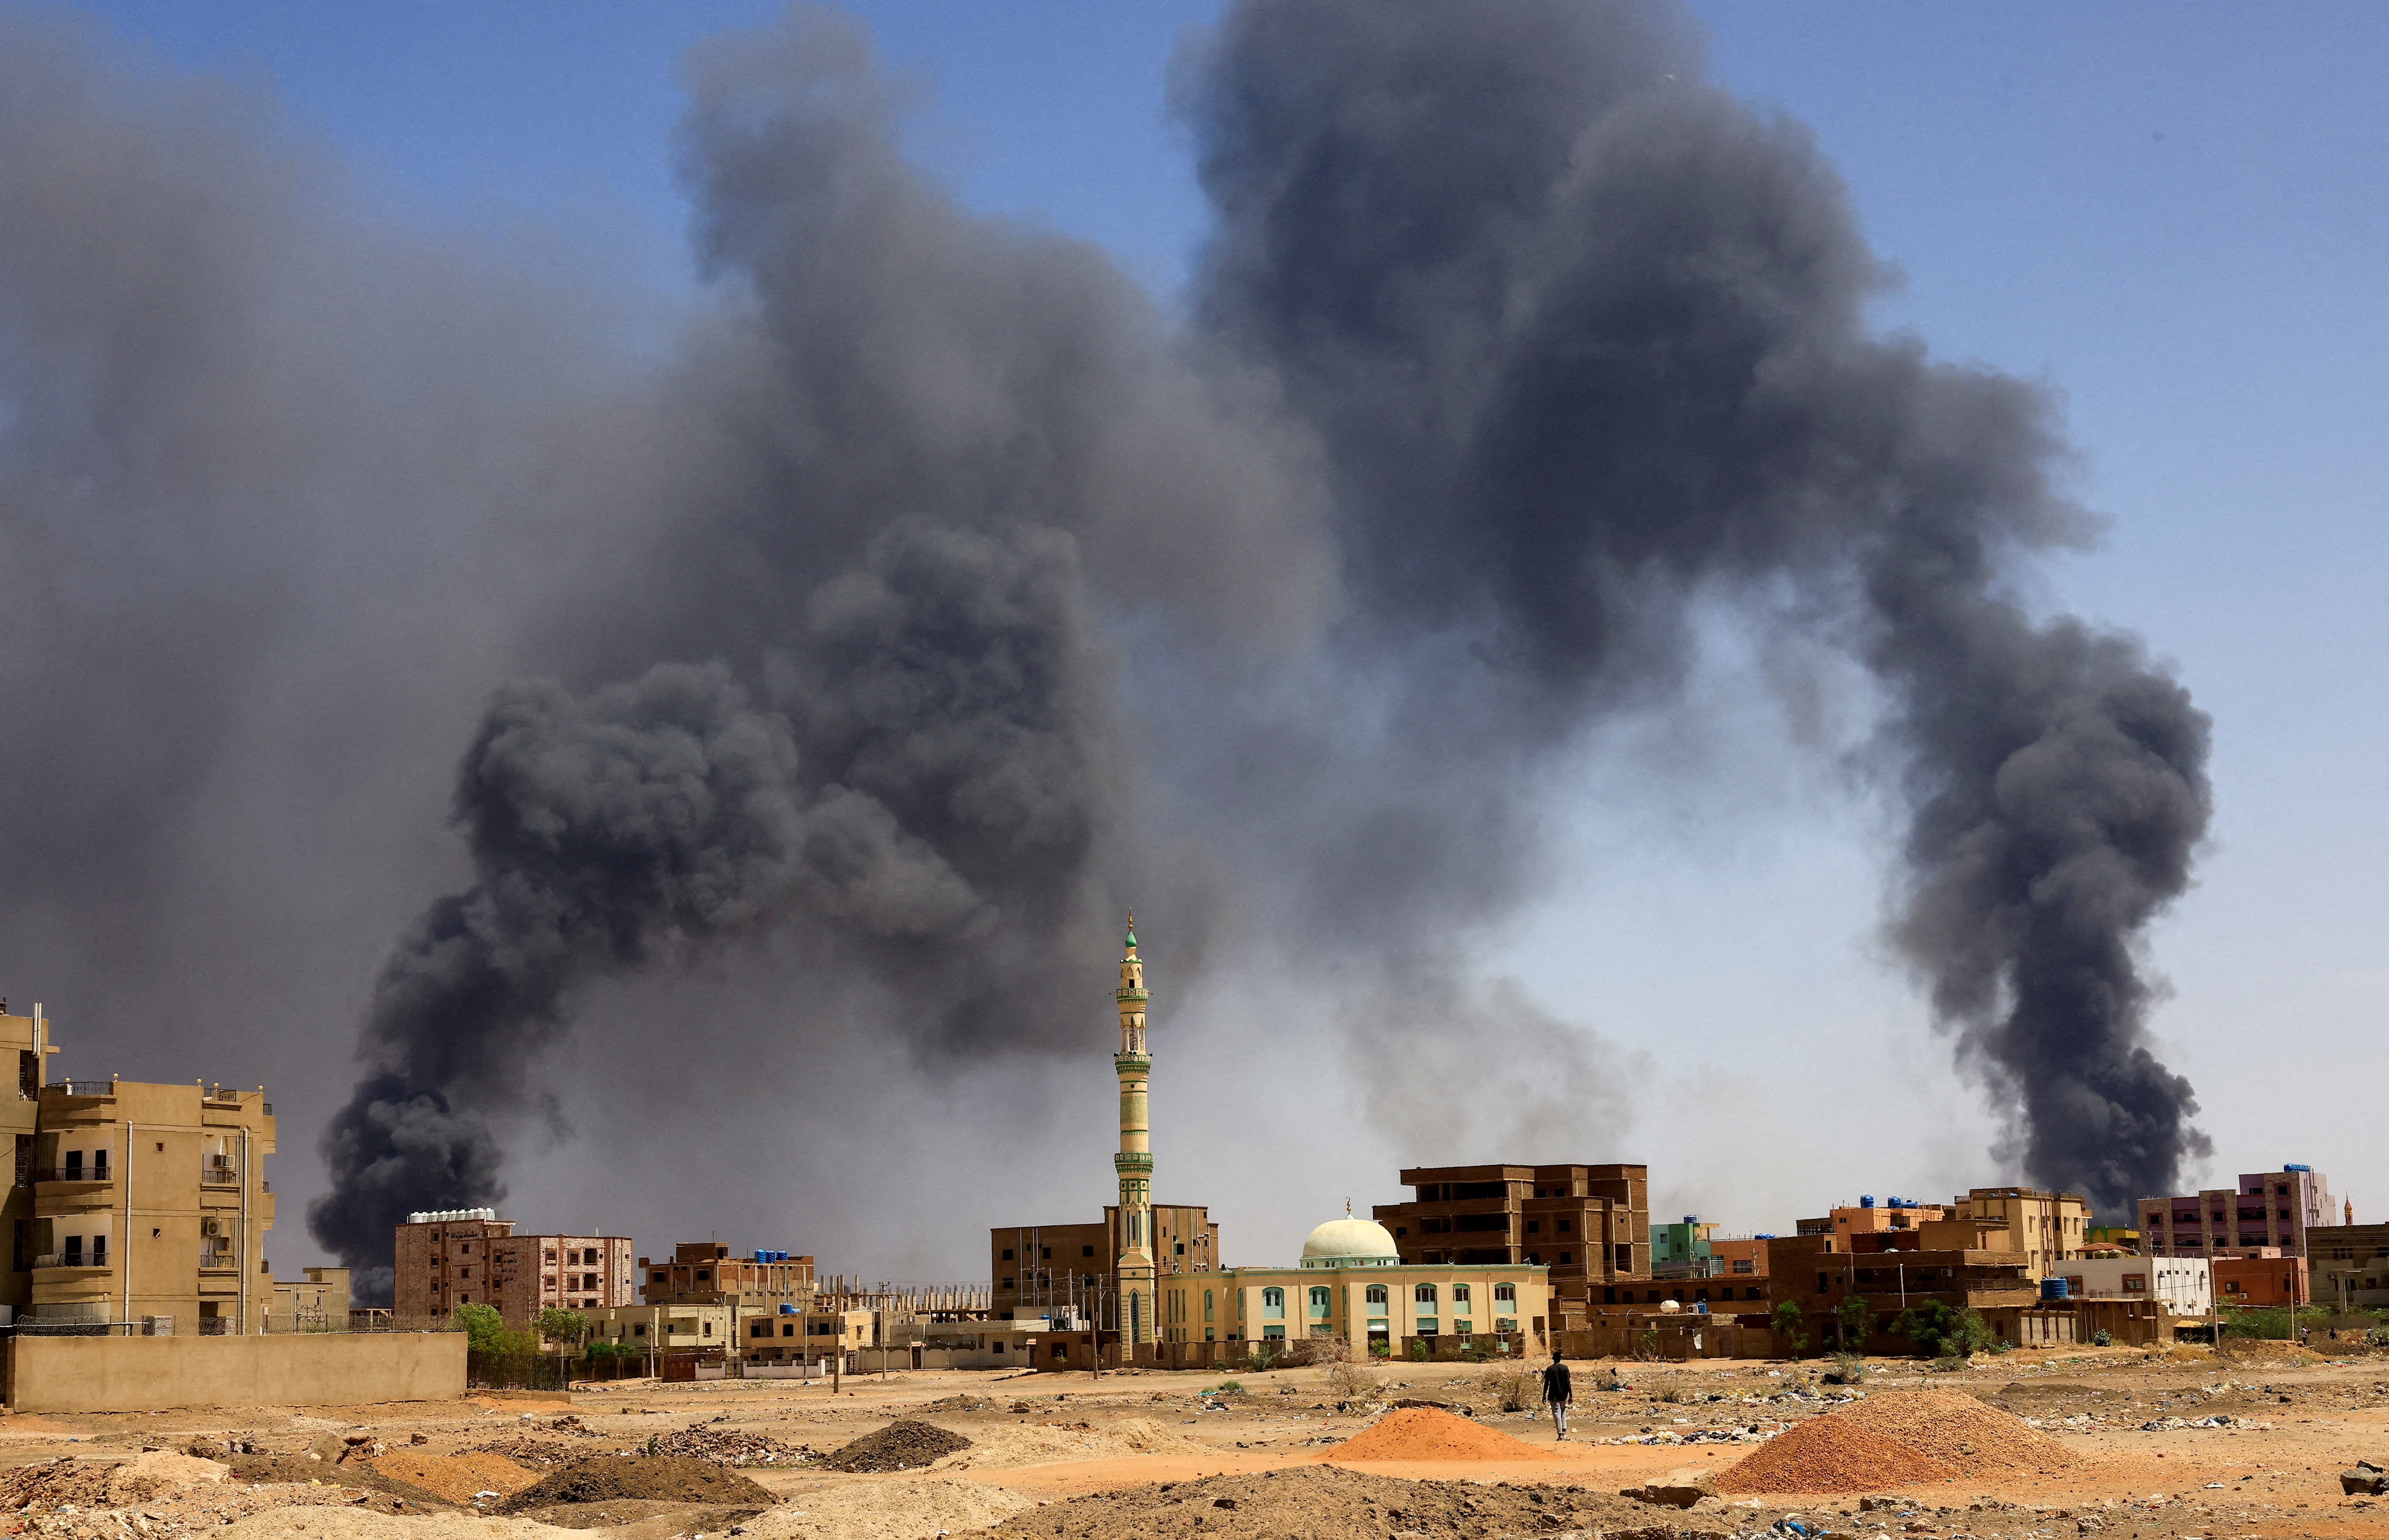 A man walks while smoke rises above buildings after aerial bombardment, during clashes between the paramilitary Rapid Support Forces and the army in Khartoum North, Sudan